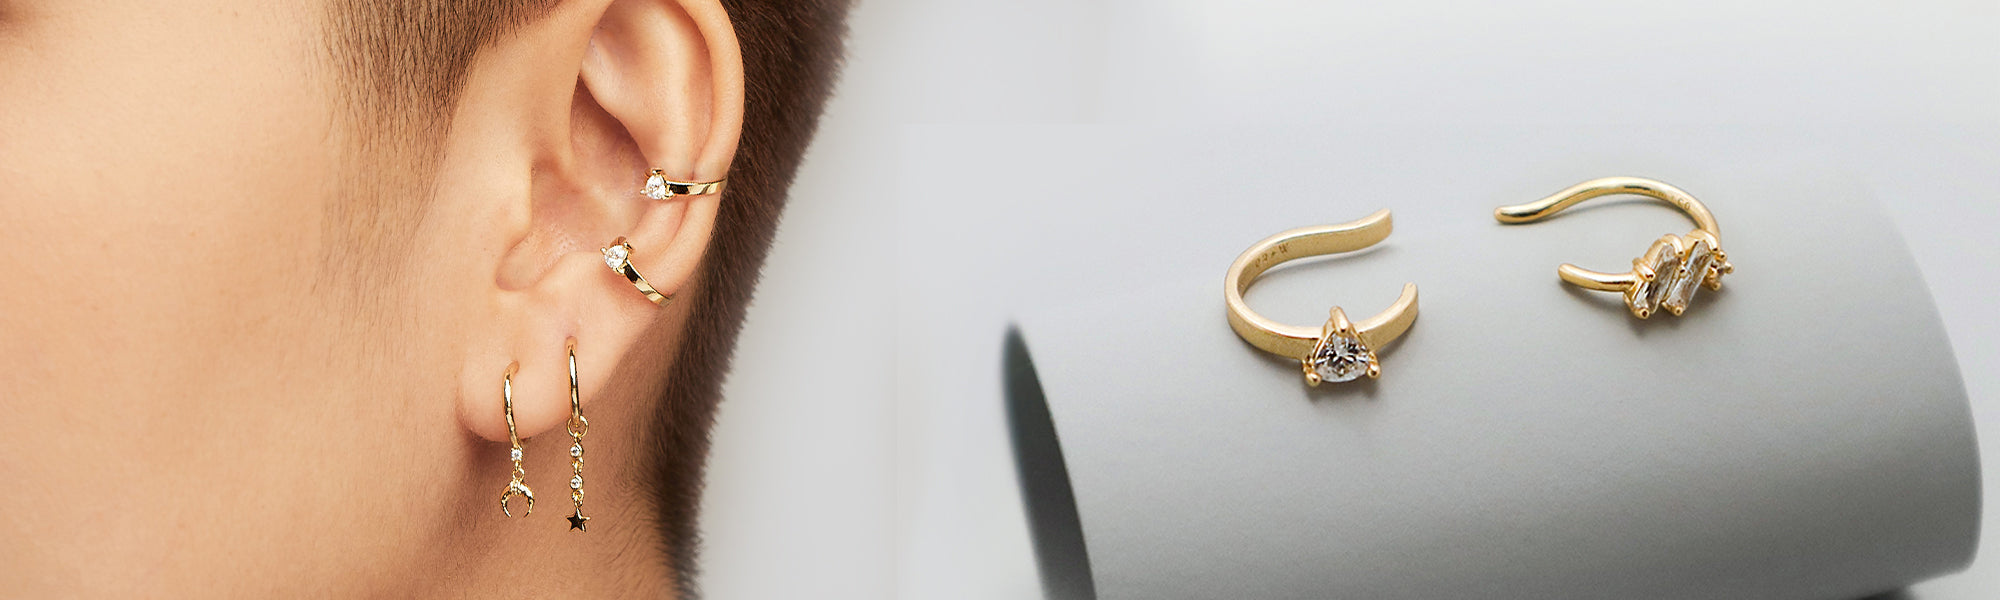 How To Curate A Cute Ear Stack